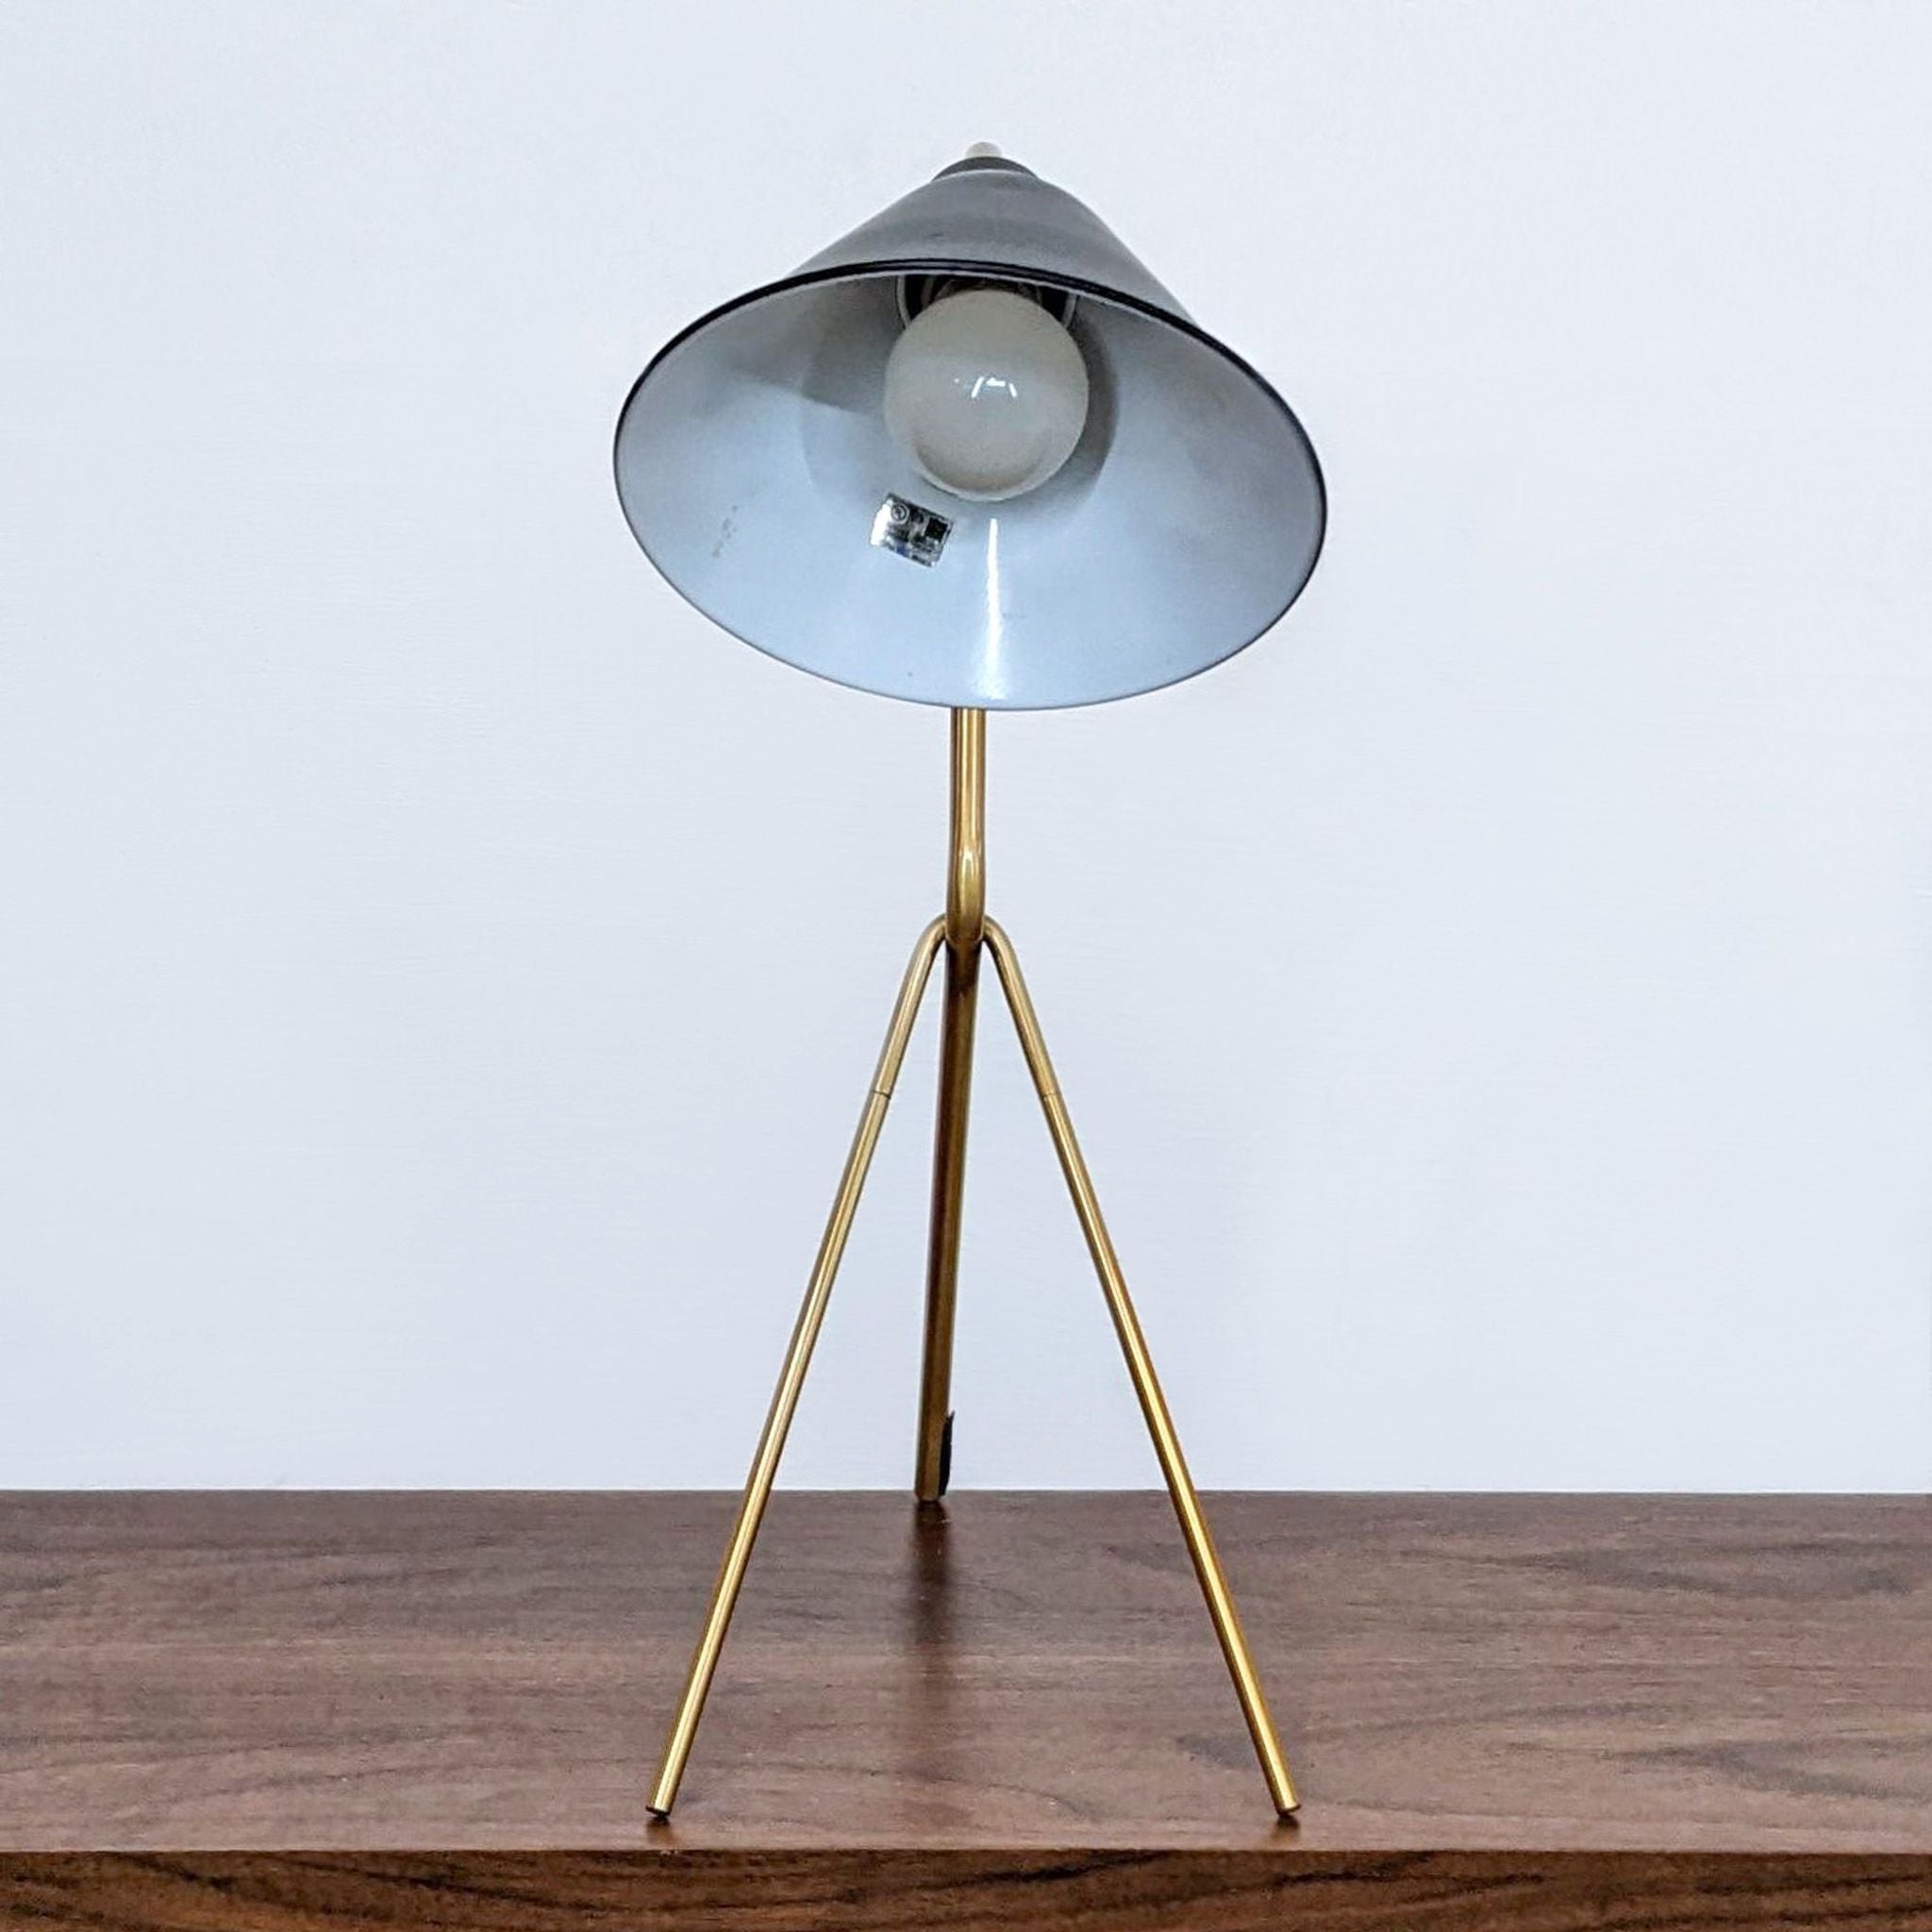 Reperch brand tripod table lamp with a metallic finish and a conical shade on a wooden surface.